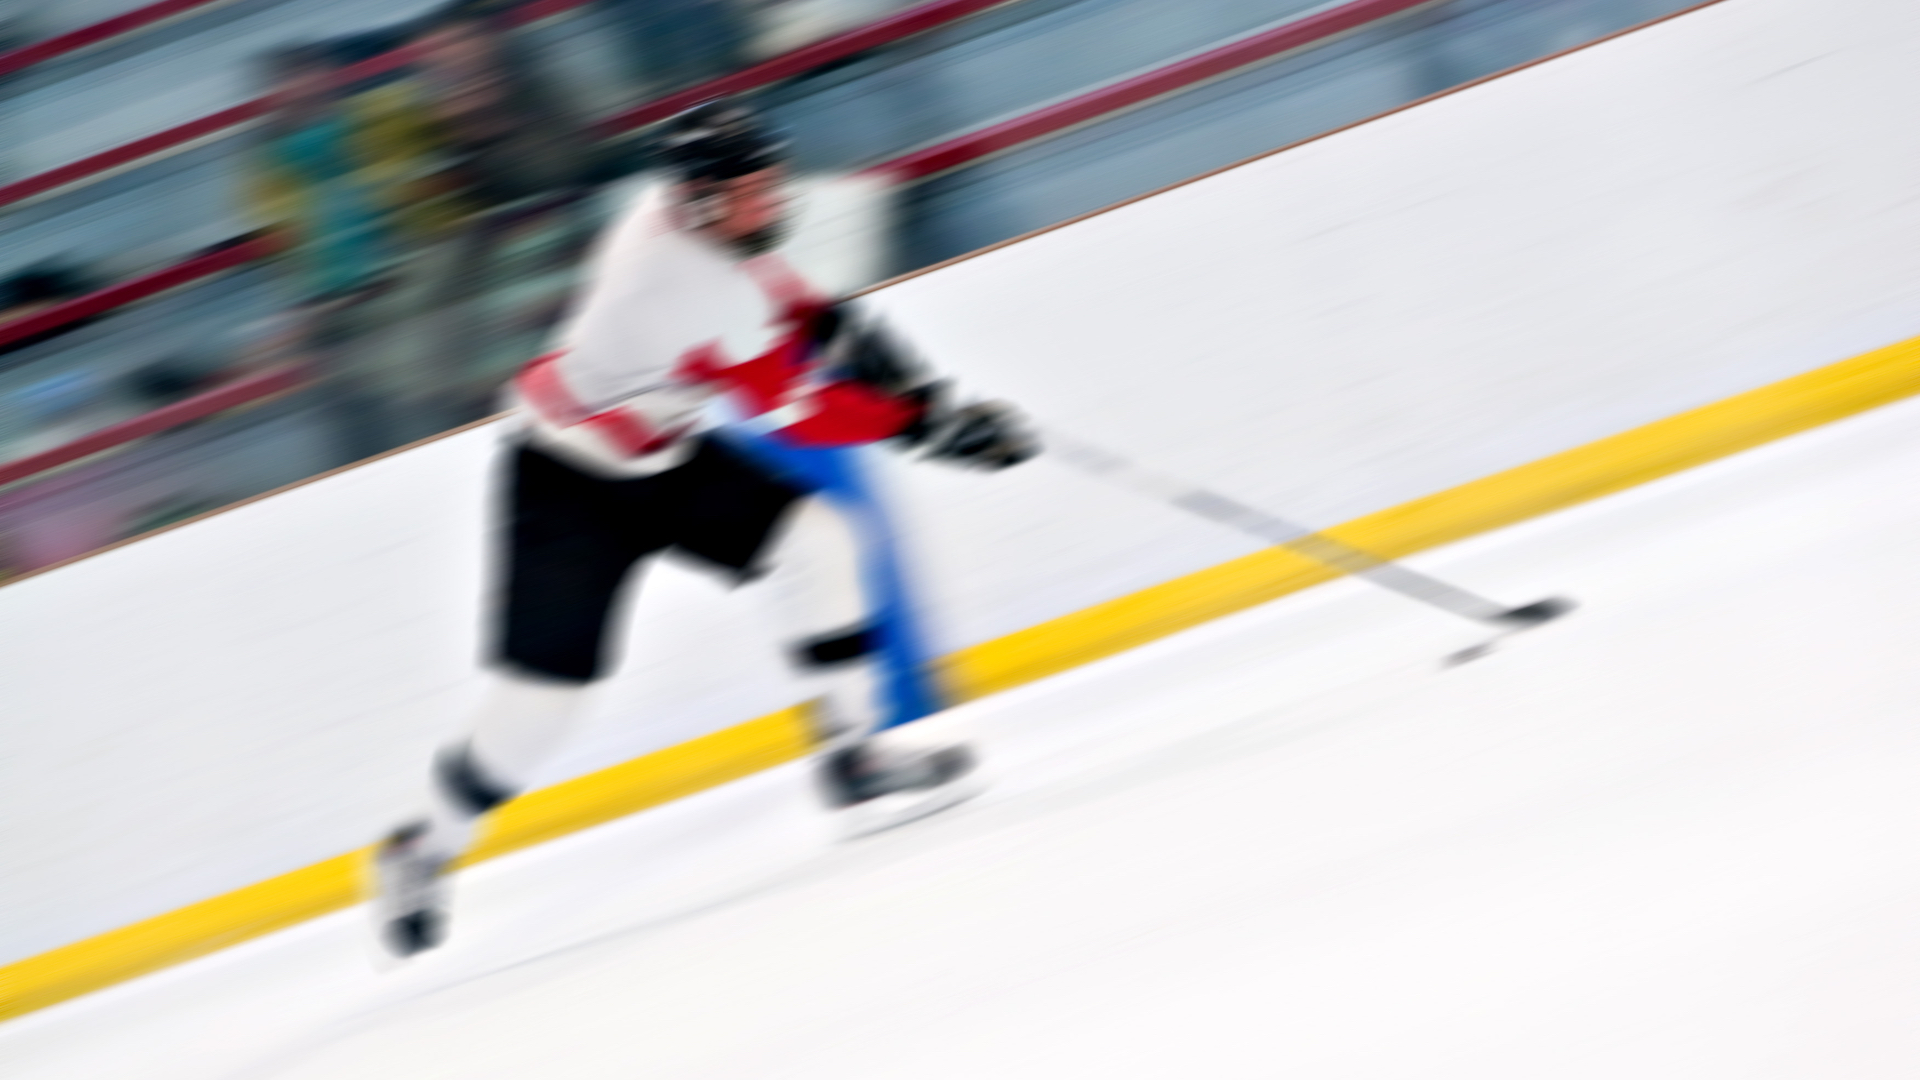 An action shot of an ice hockey player